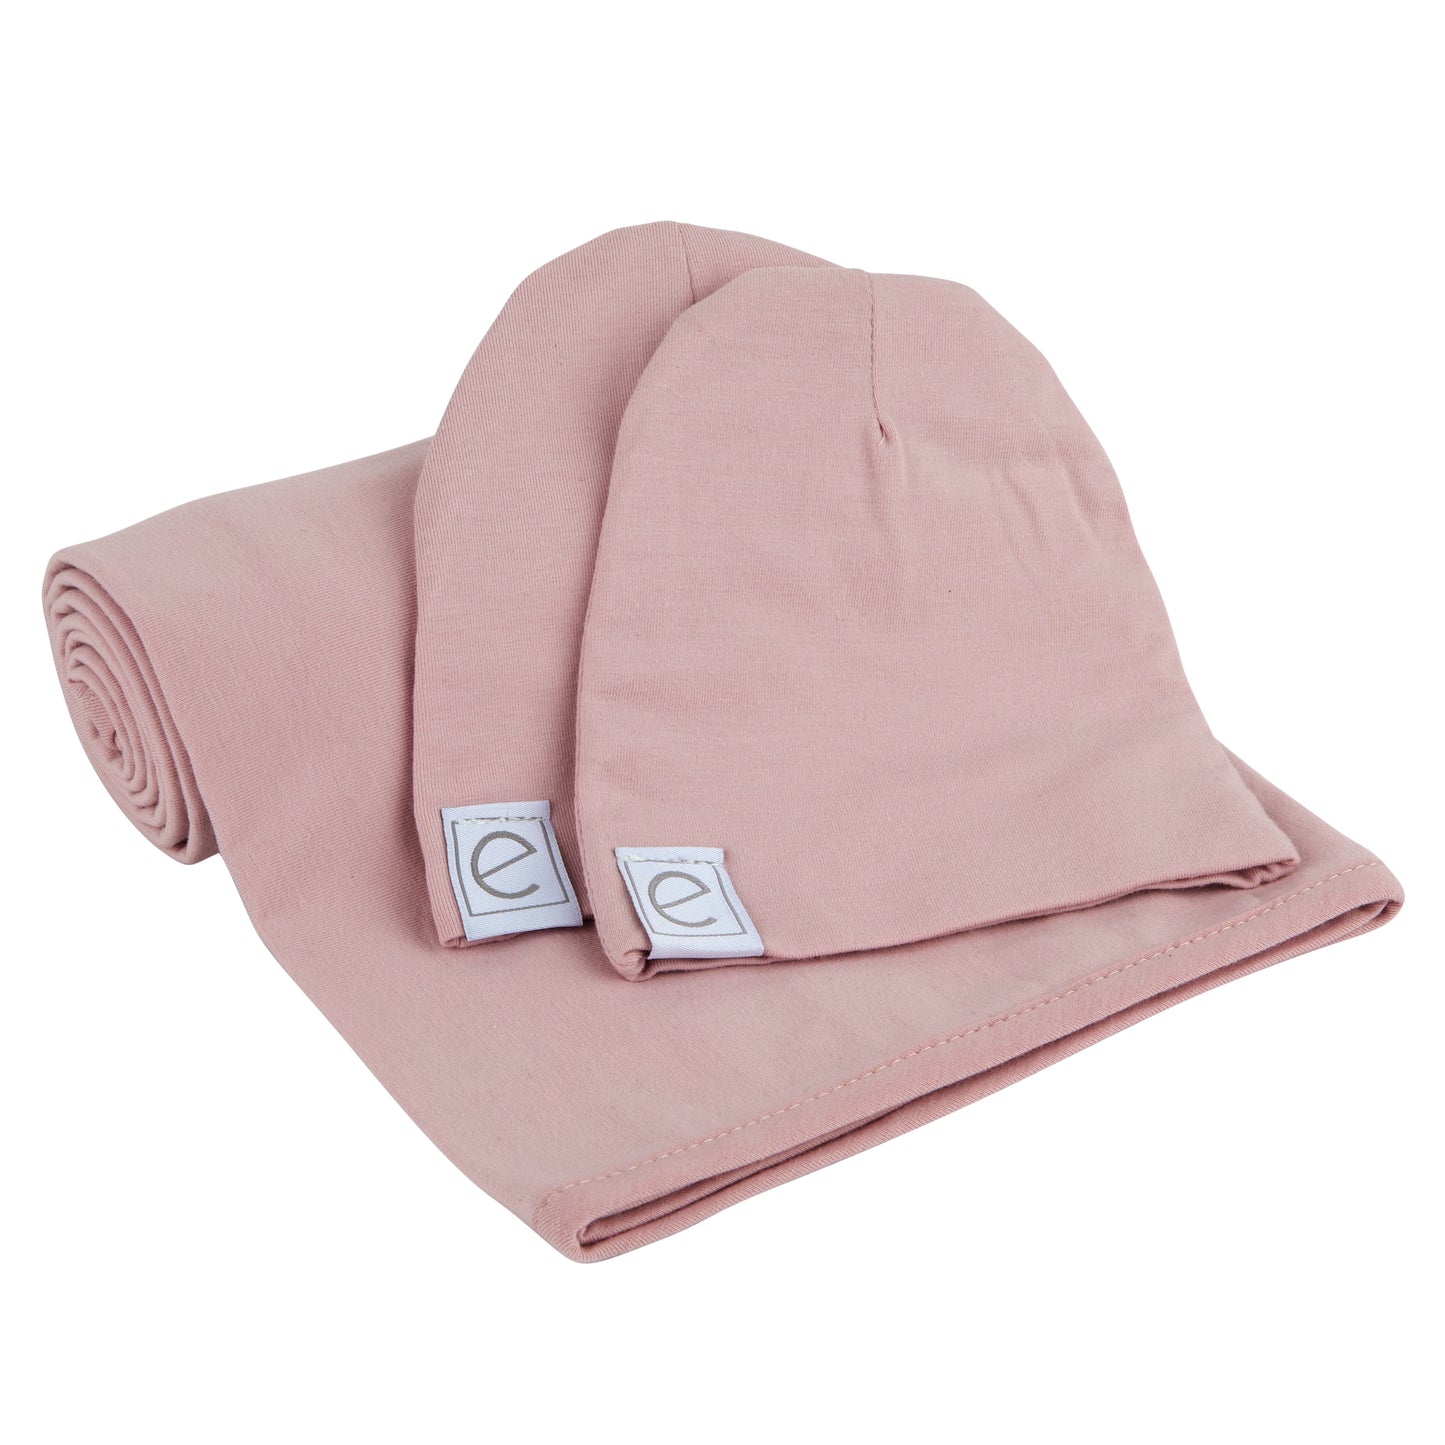 Ely's & Co. Cotton Spandex Swaddle Set (Includes a matching NB & 0-3m Hat)